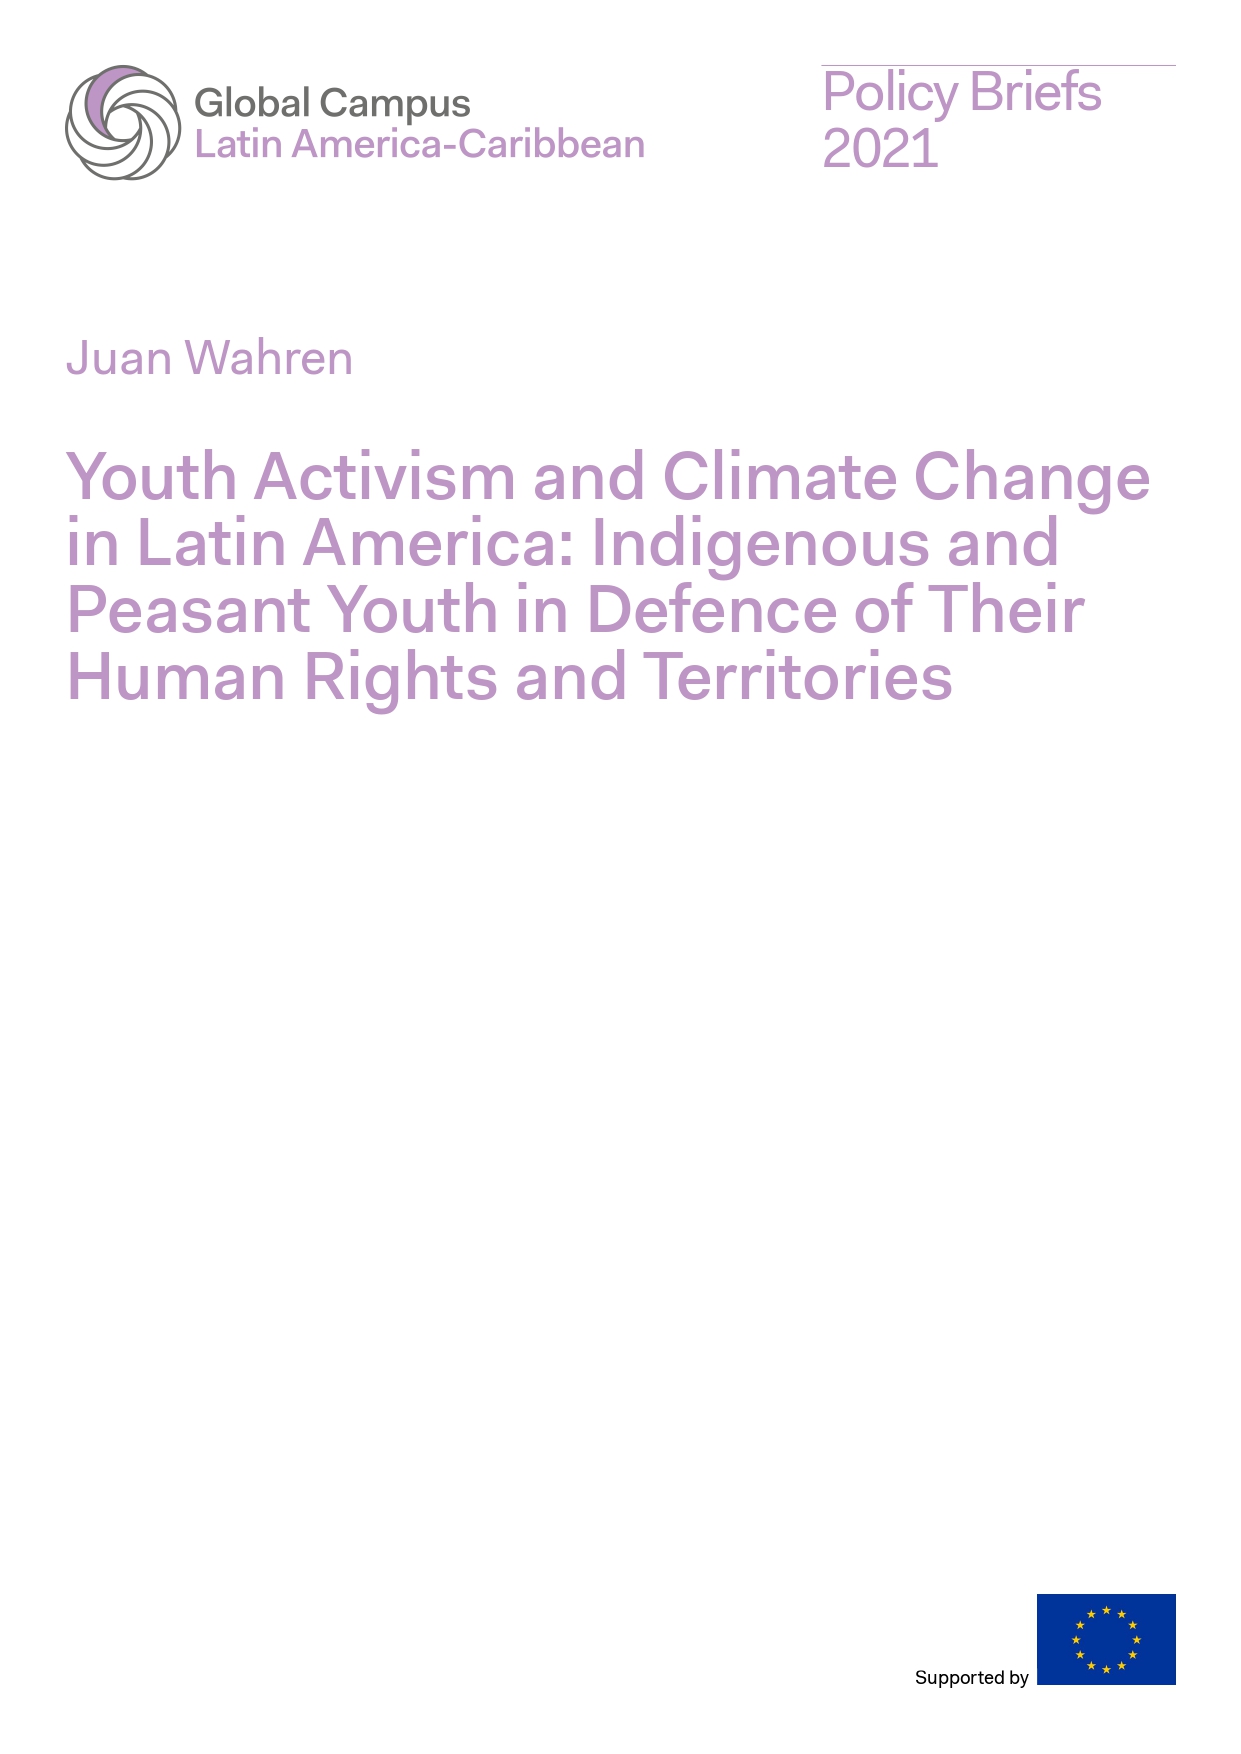 Youth Activism and Climate Change in Latin America: Indigenous and Peasant Youth in Defence of their Human Rights and Territories